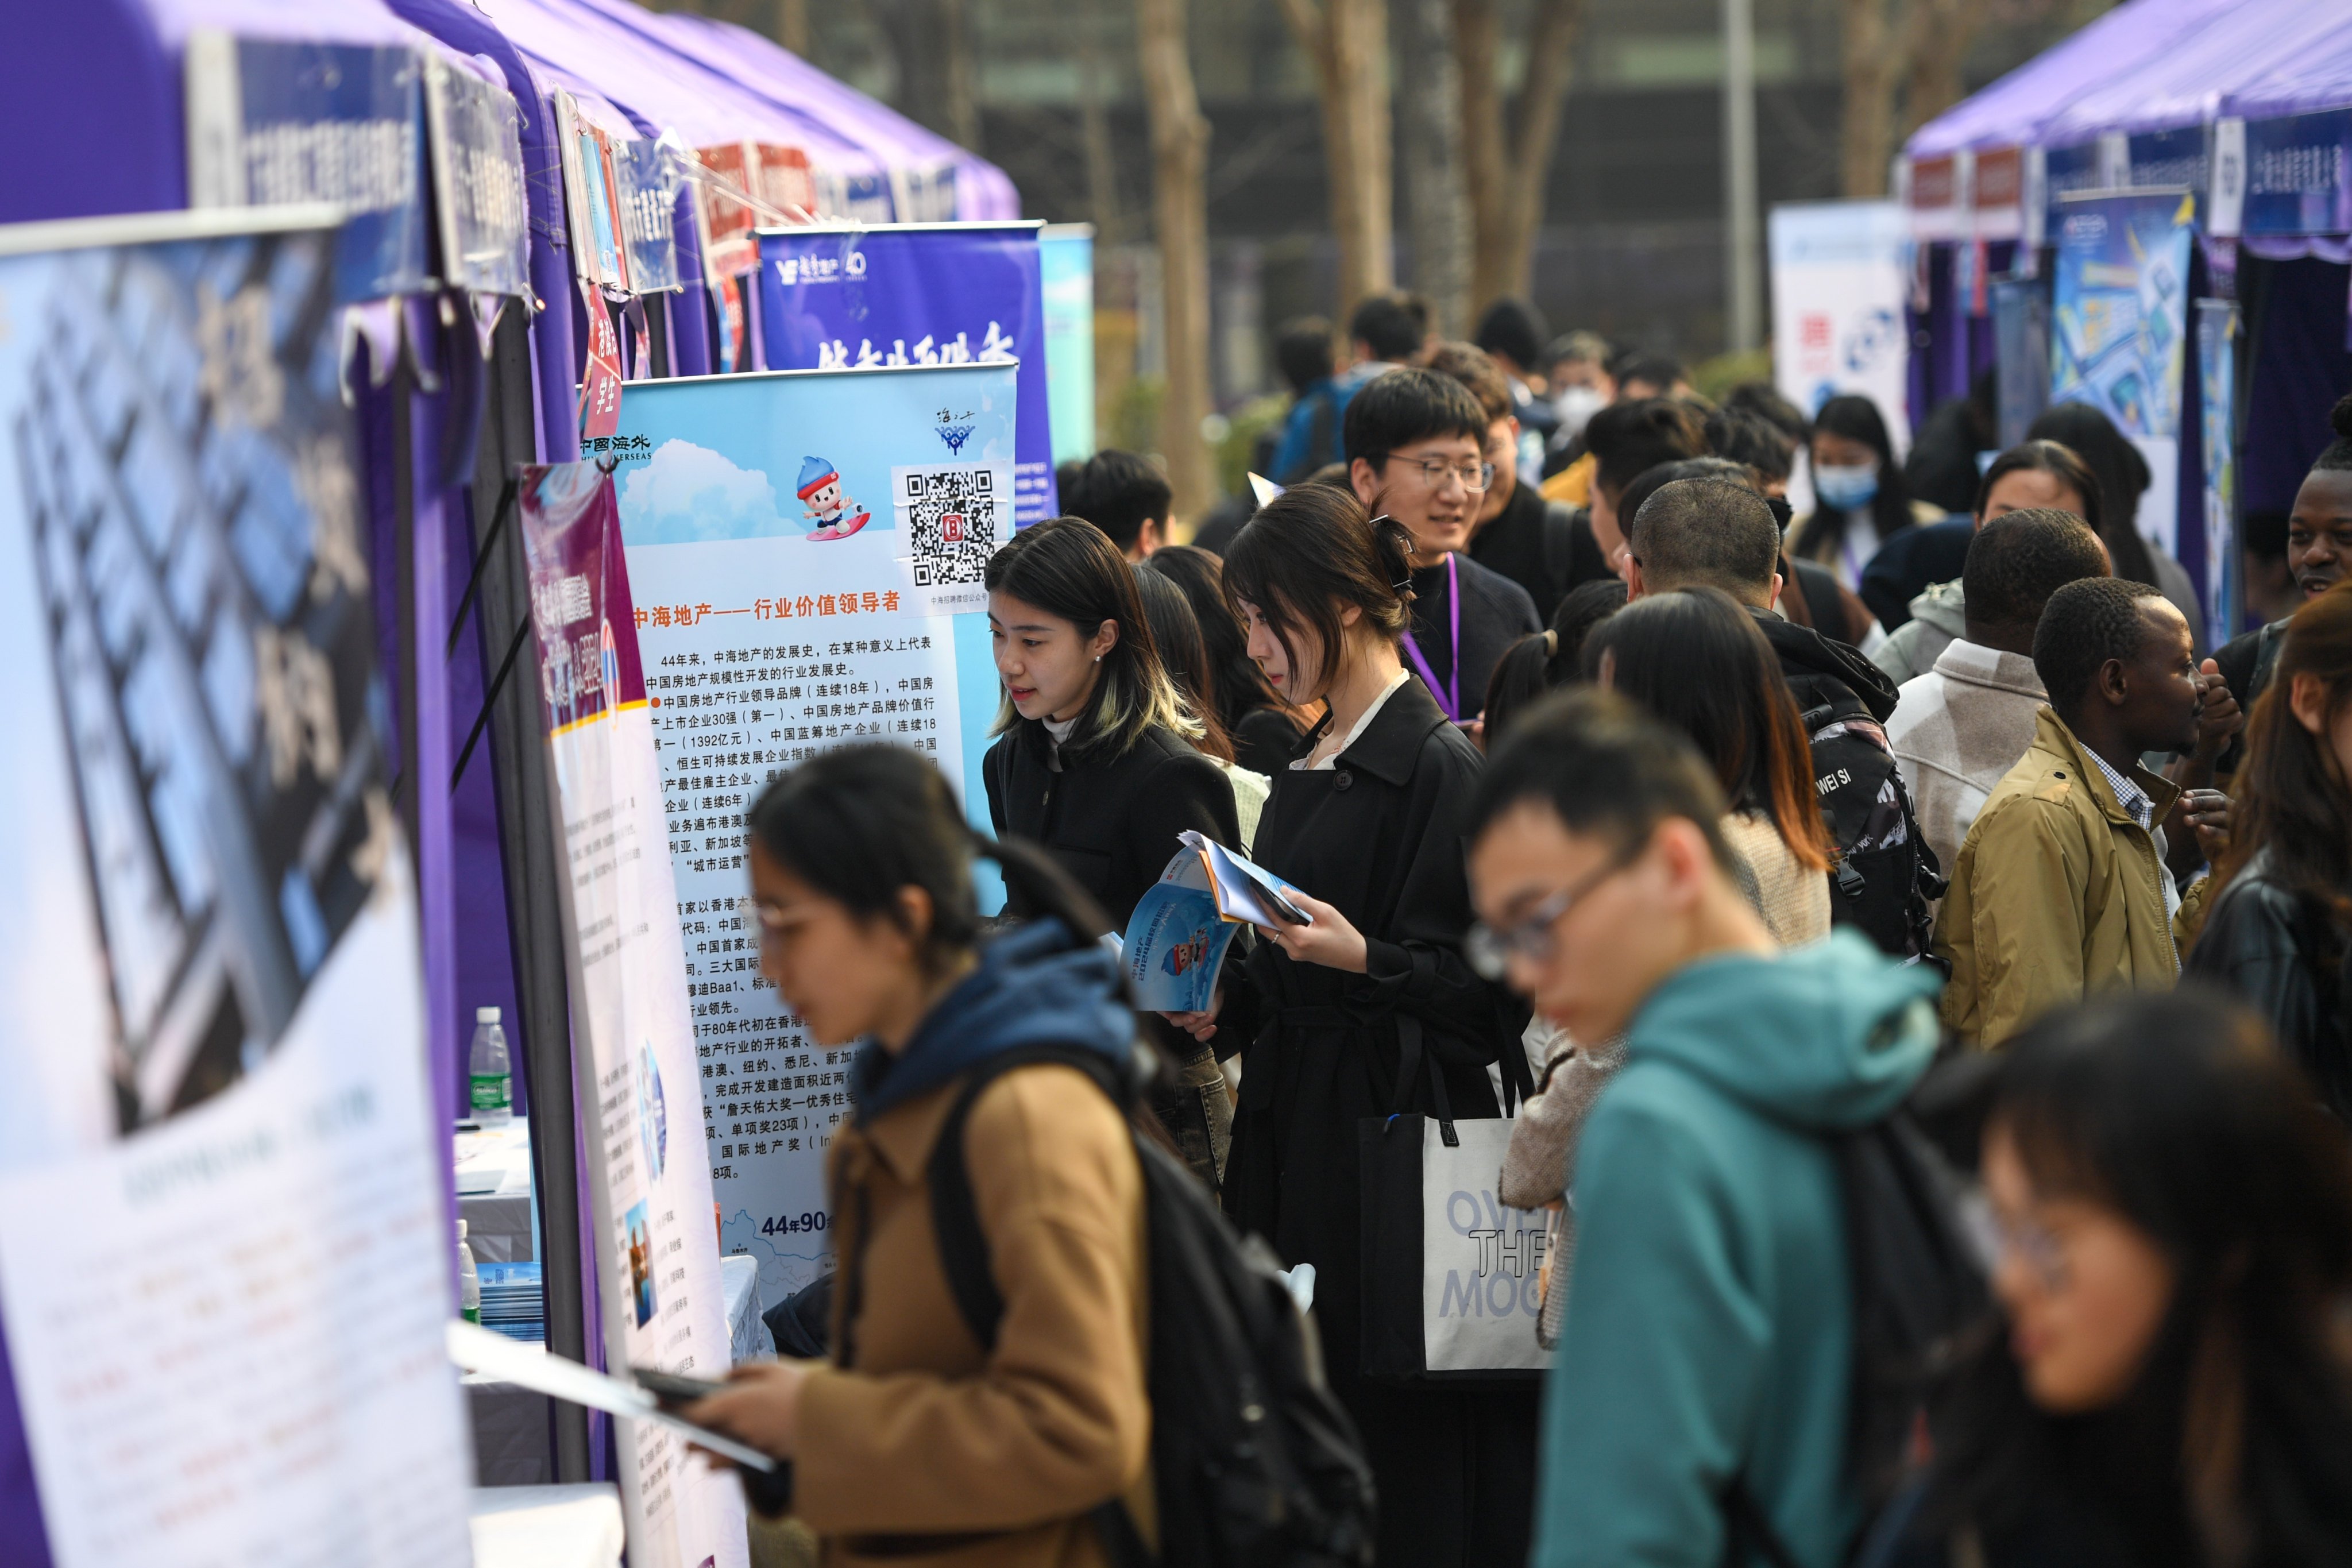 The youth jobless rate for the 16-24 age group in China reached 15.3 per cent in February, up from 14.6 per cent in January. Photo: Xinhua